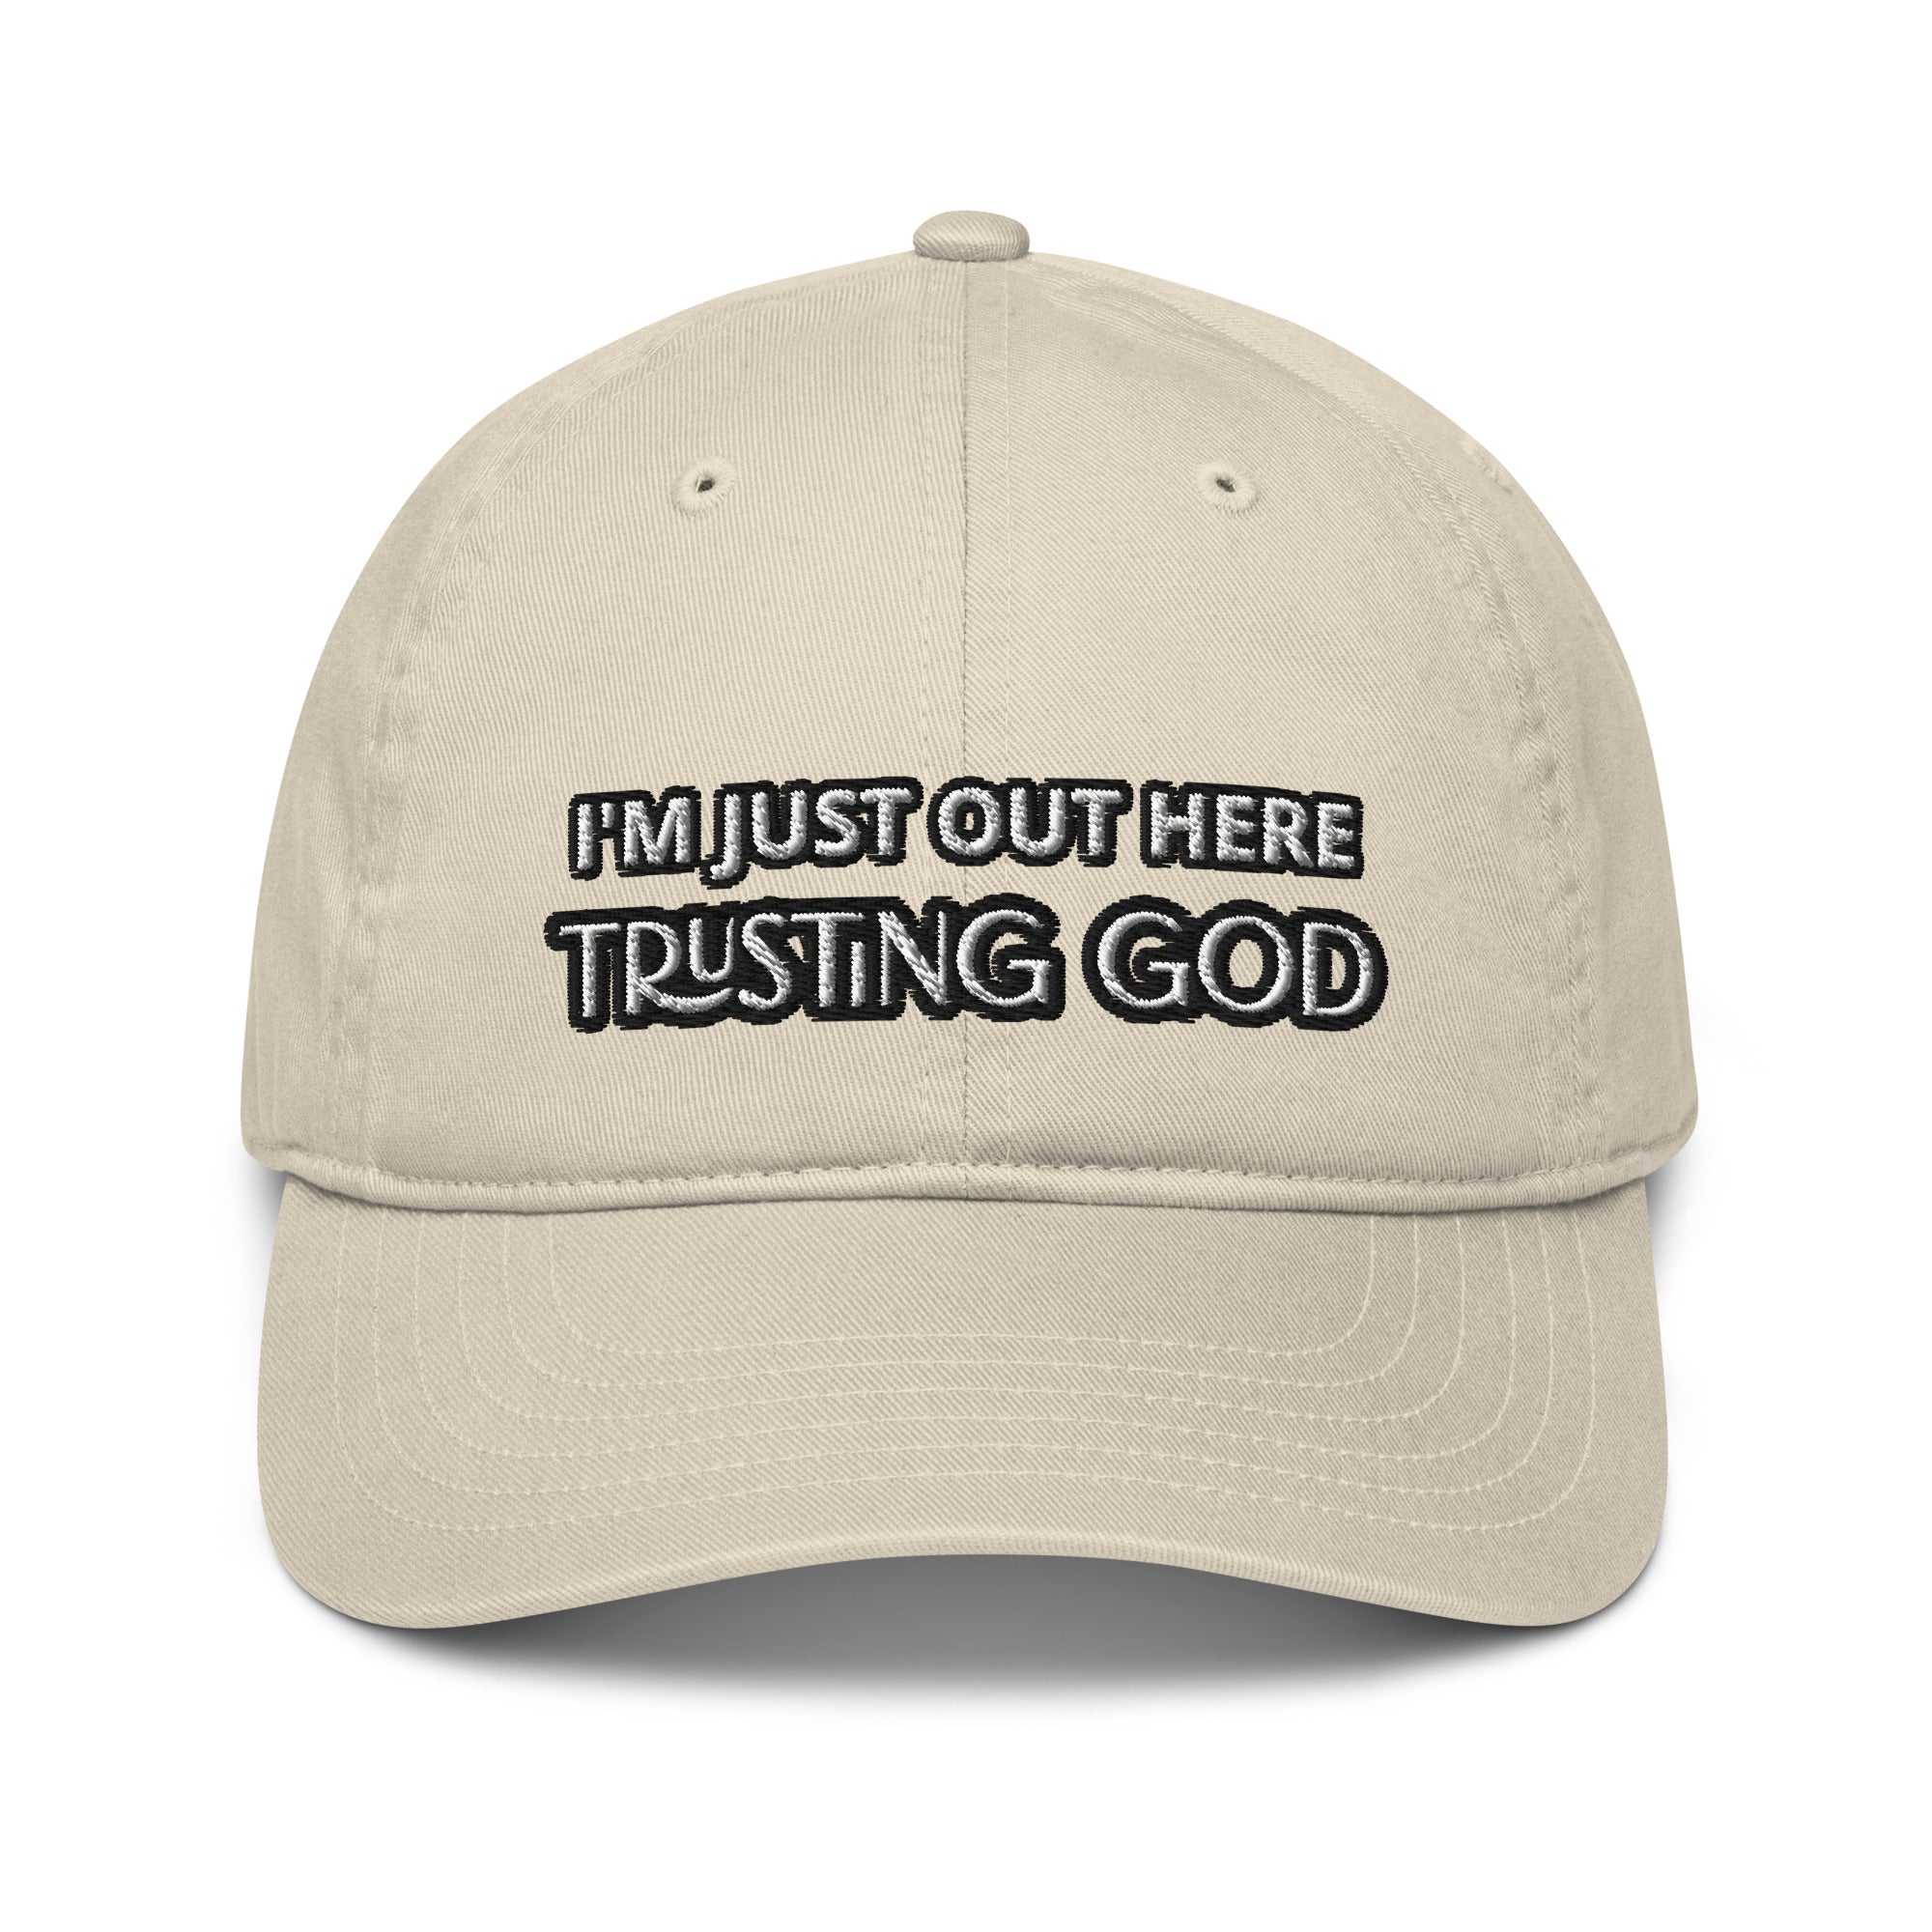 Out Here Trusting God dad hat